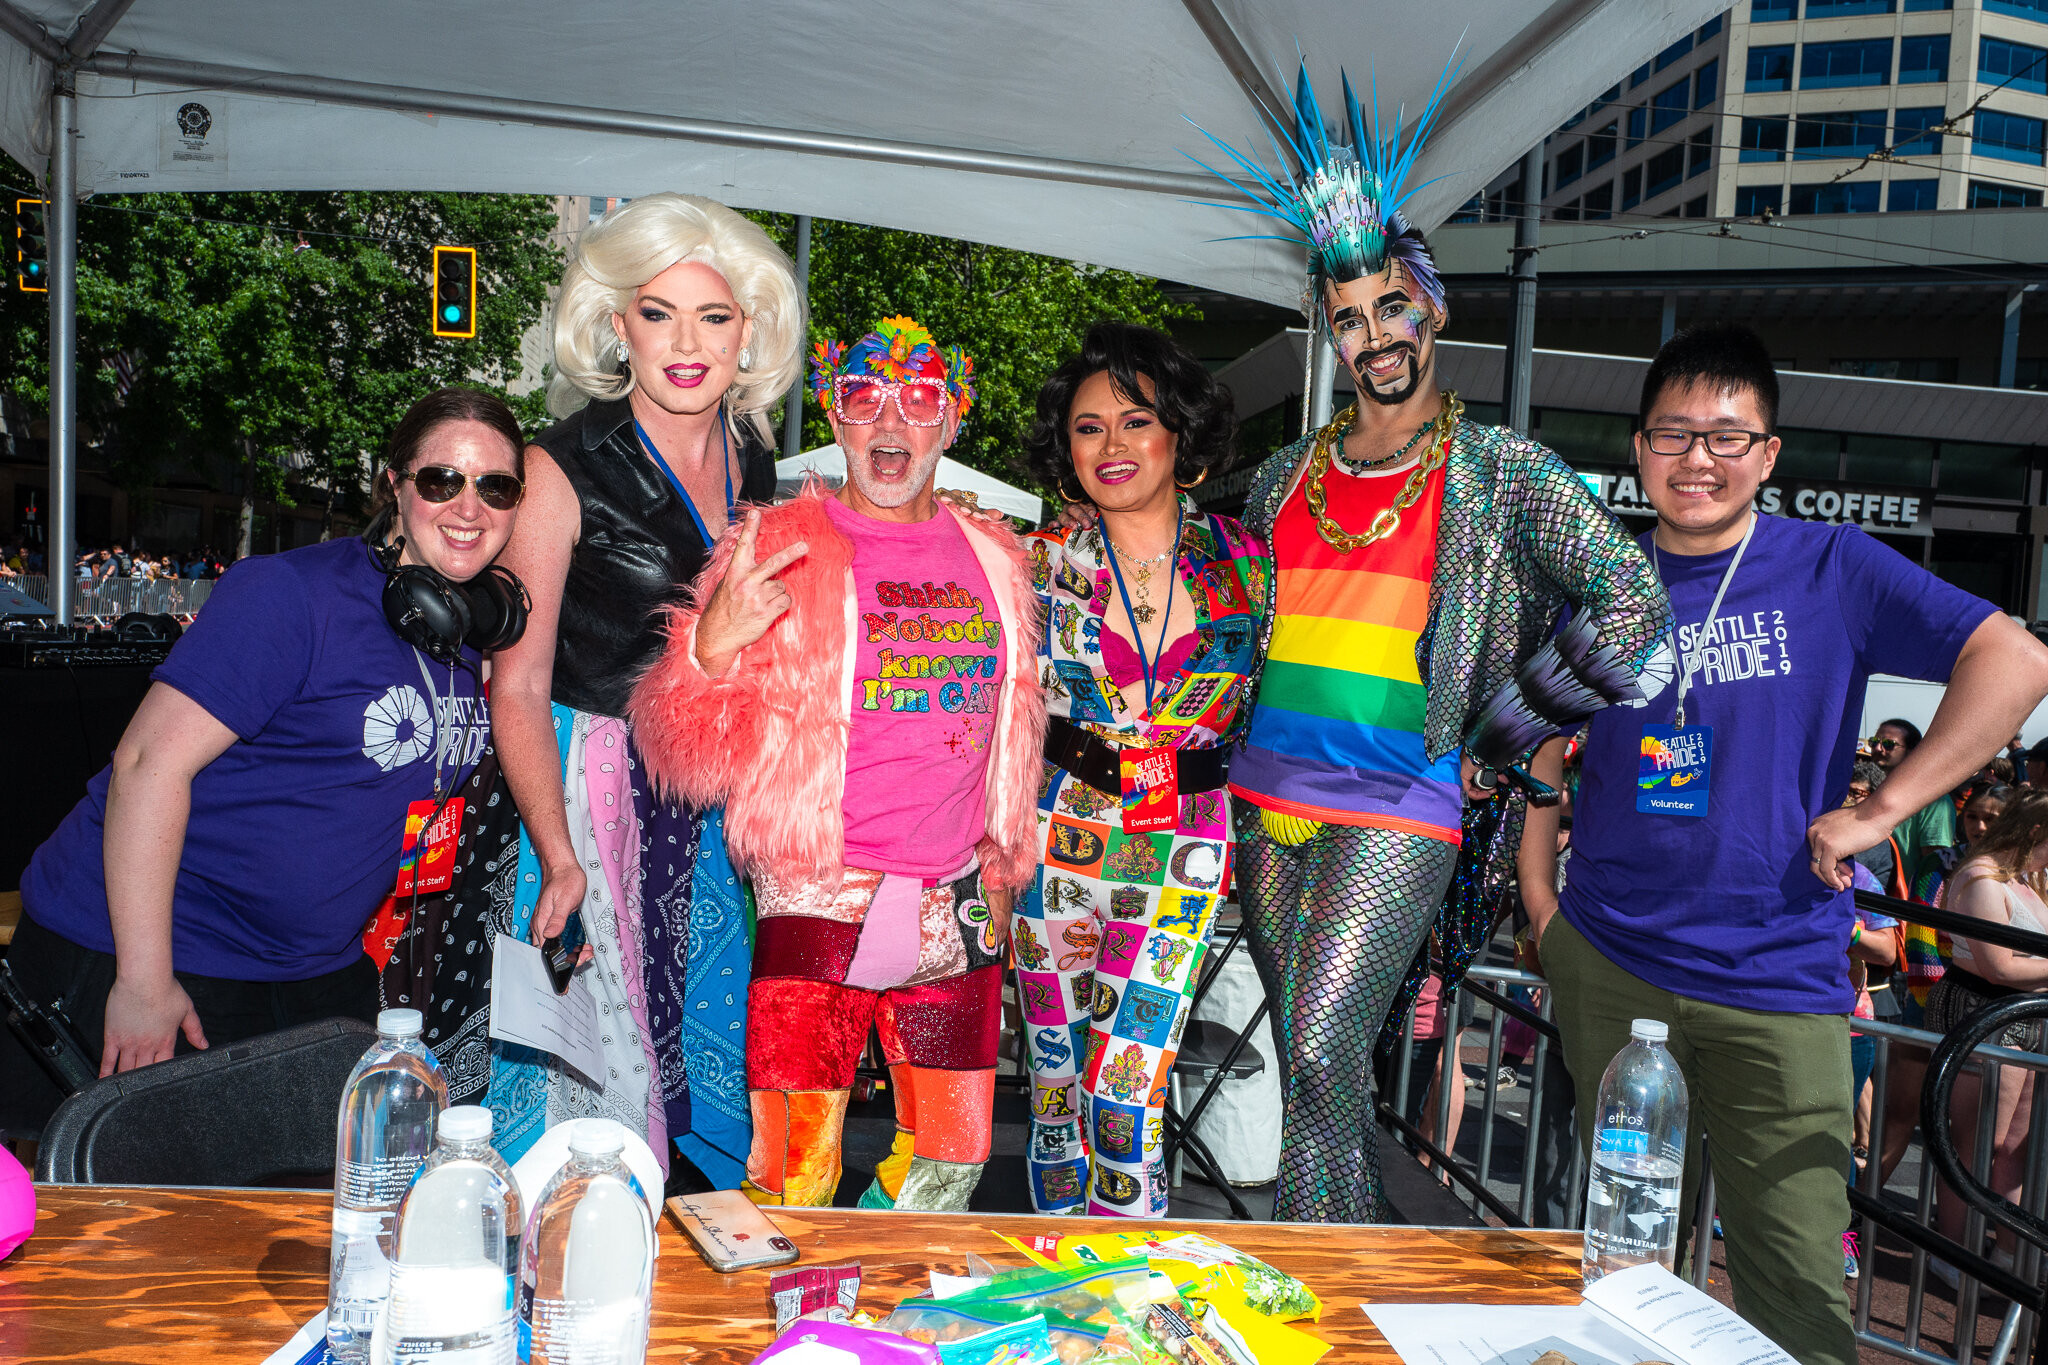 Seattle Pride Parade_Web-res (Credit- Nate Gowdy)-005.jpg